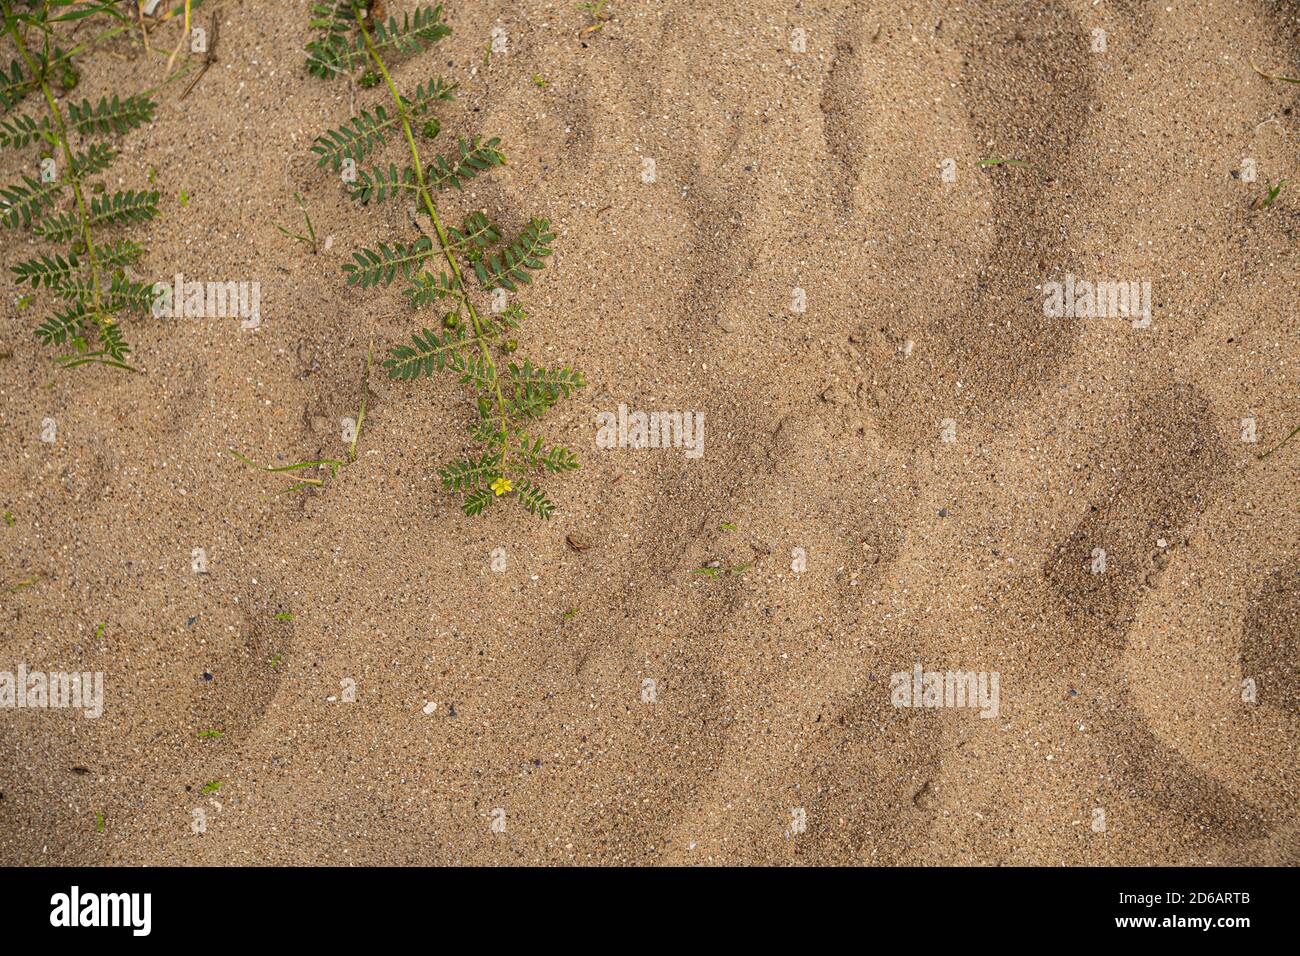 Top view of green leaves on sandy surface Stock Photo